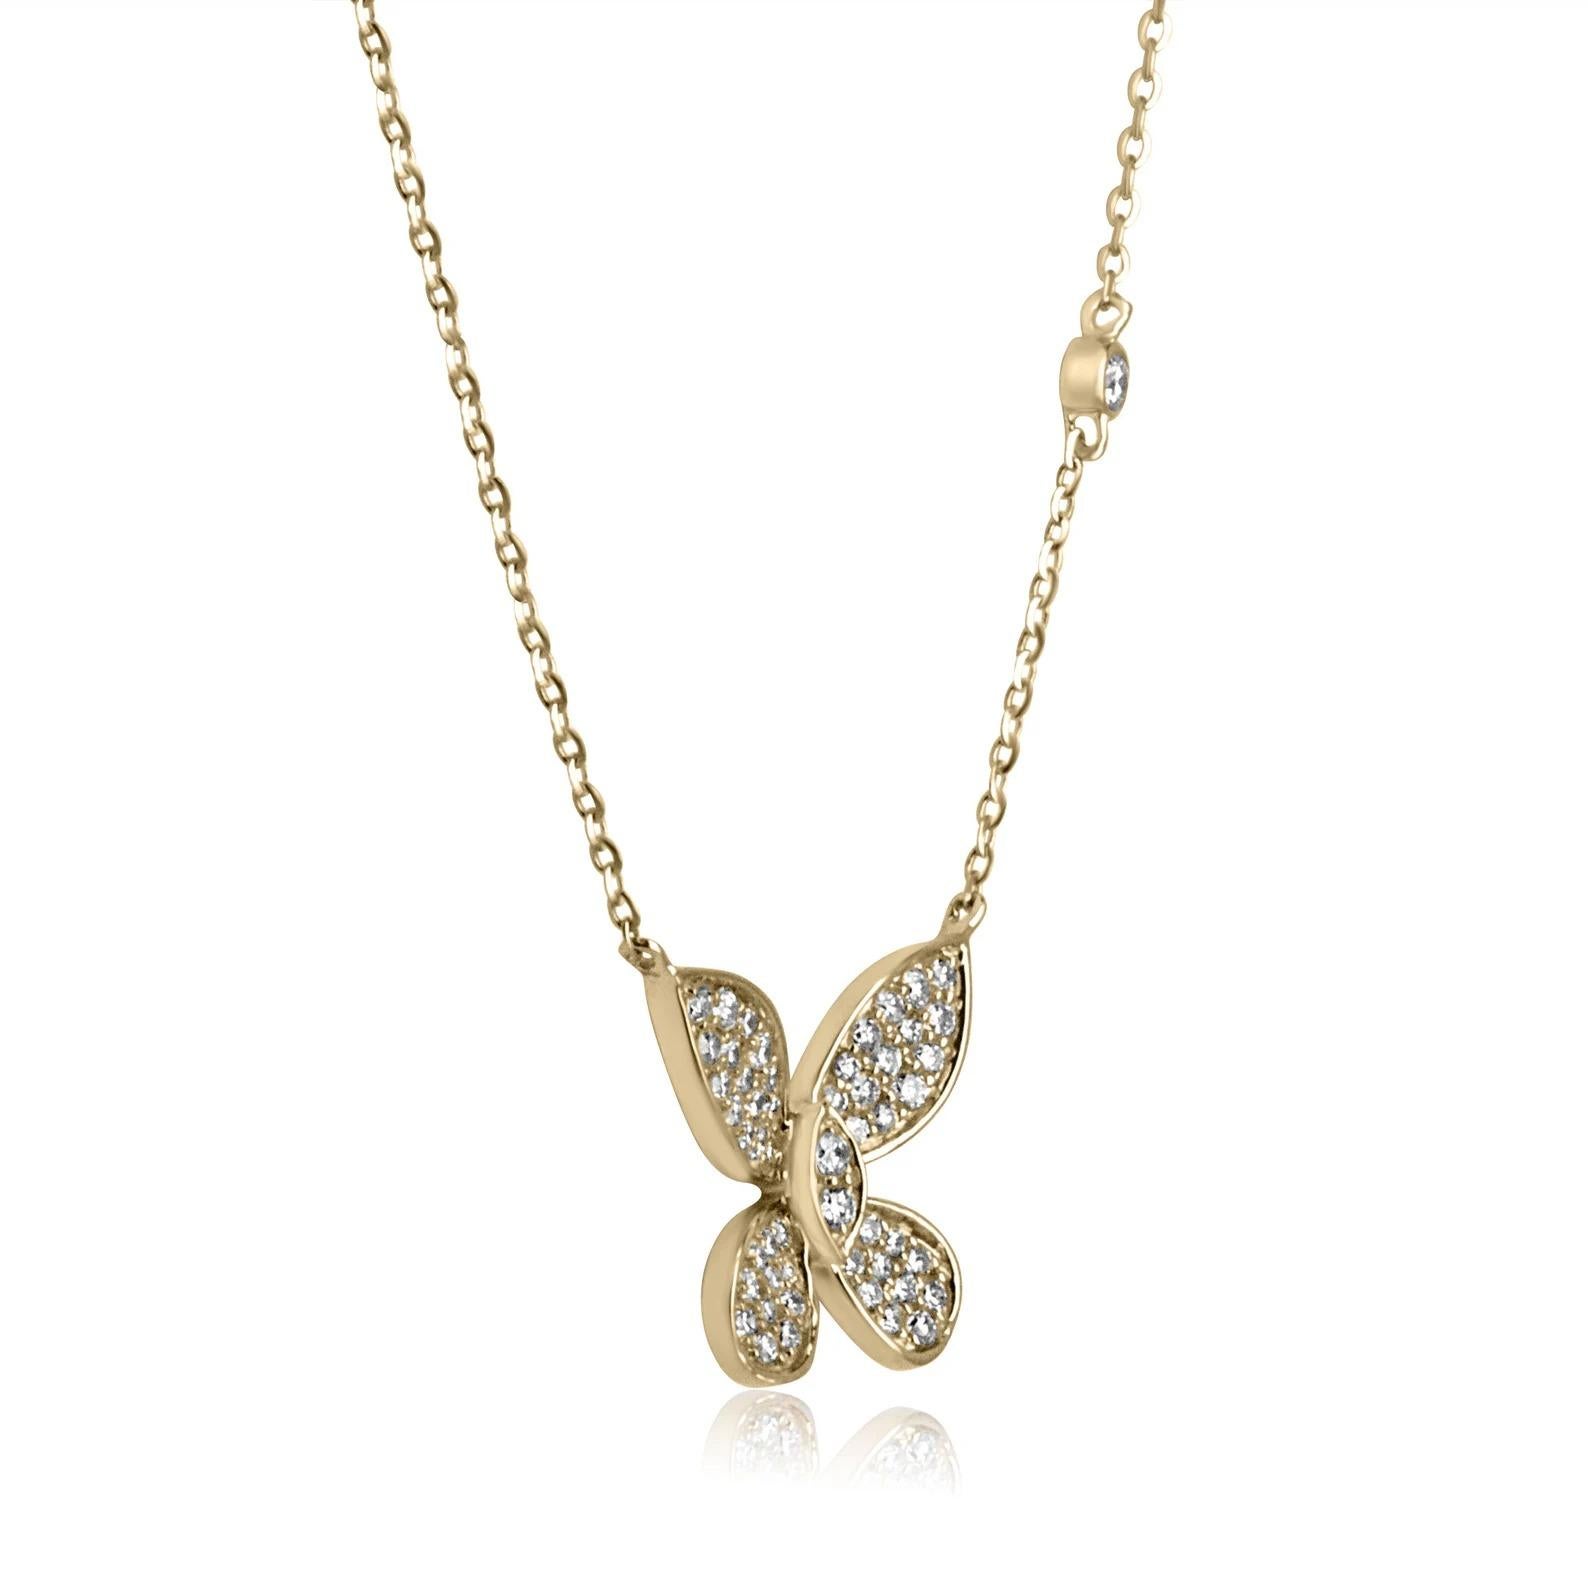 A stunning, and dainty butterfly necklace. This gorgeous piece makes the perfect gift, for any occasion and caters to all. Numerous natural brilliant round-cut diamonds are pave set within the beautiful butterfly design, and a diamond accent is also